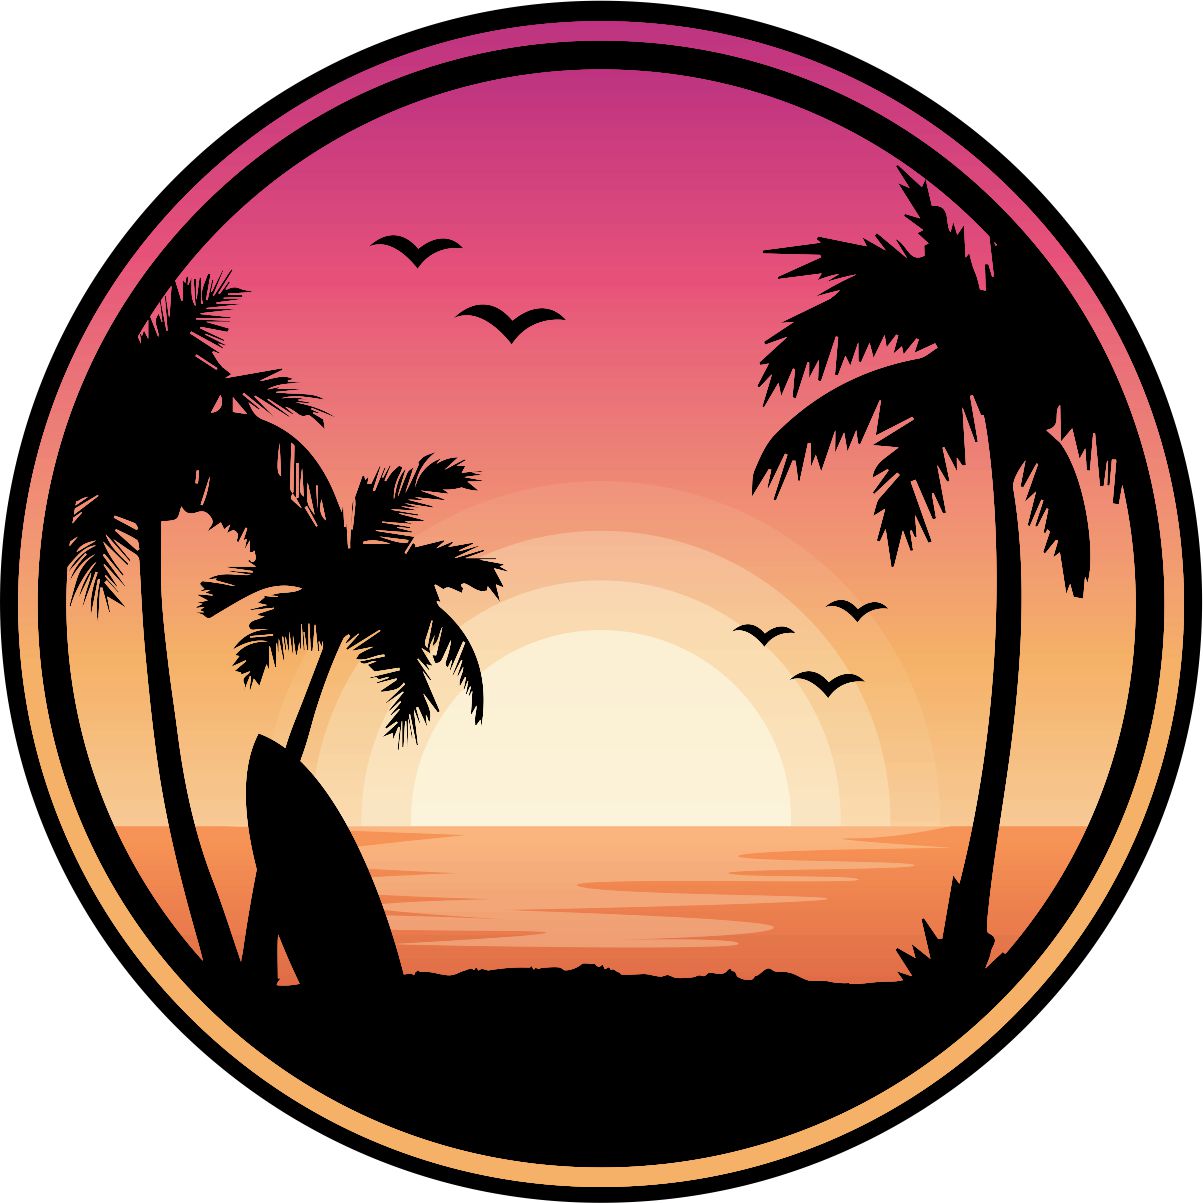 Sunset sky over a tropical paradise beautiful spare tire cover for vinyl. Palm tree silhouettes, surfboard, and the sun's colors on the sky and water.